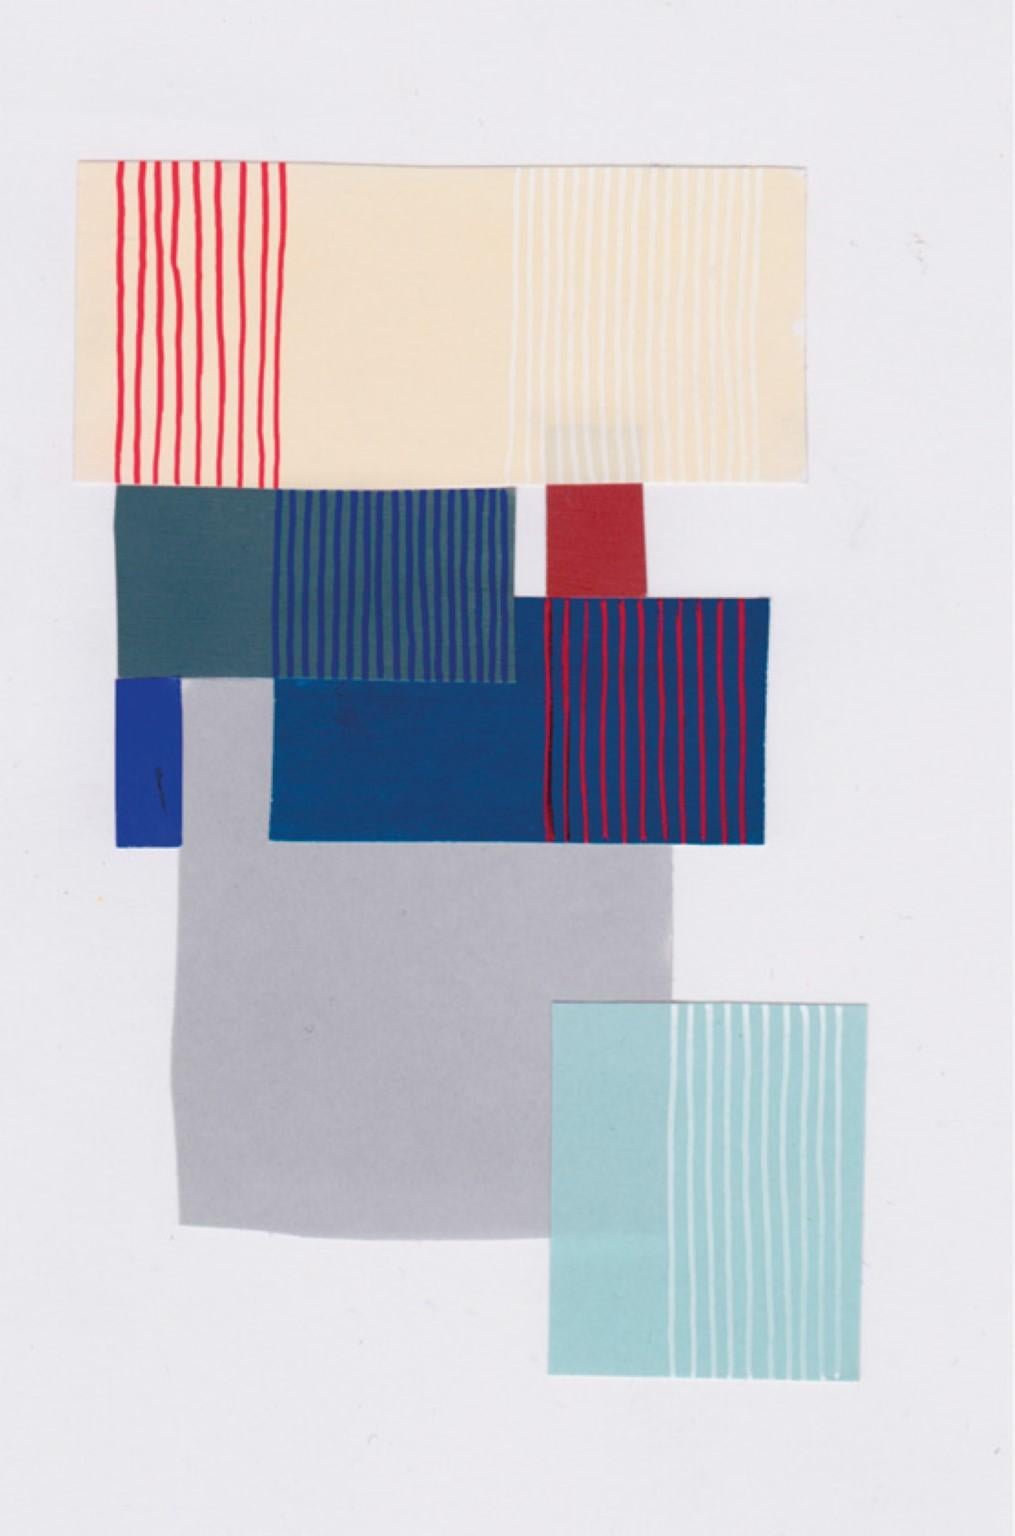 Flag rug by Marta Bakowski
Dimensions: 200 x 290 cm
Made to order creations can be done

Flag is a rug built as an accumulation of superimposed colored shapes. Each rug is custom made and therefore can be produced with bespoke dimensions and